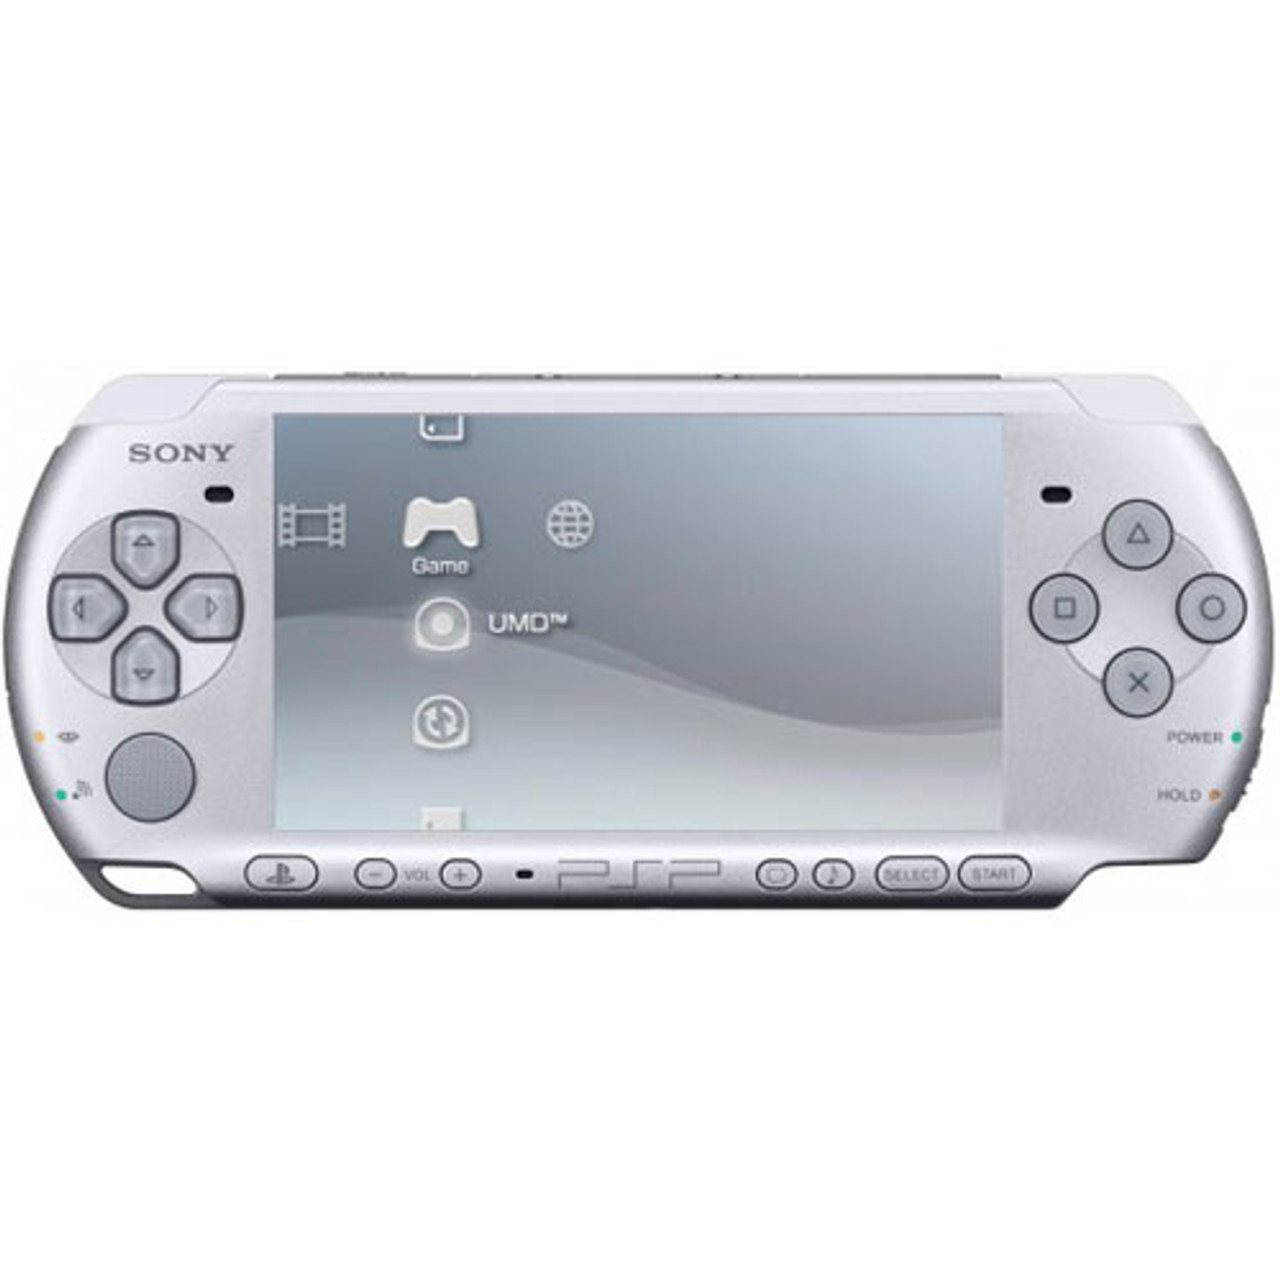 Sony PSP 3000 Handheld System Silver With Charger